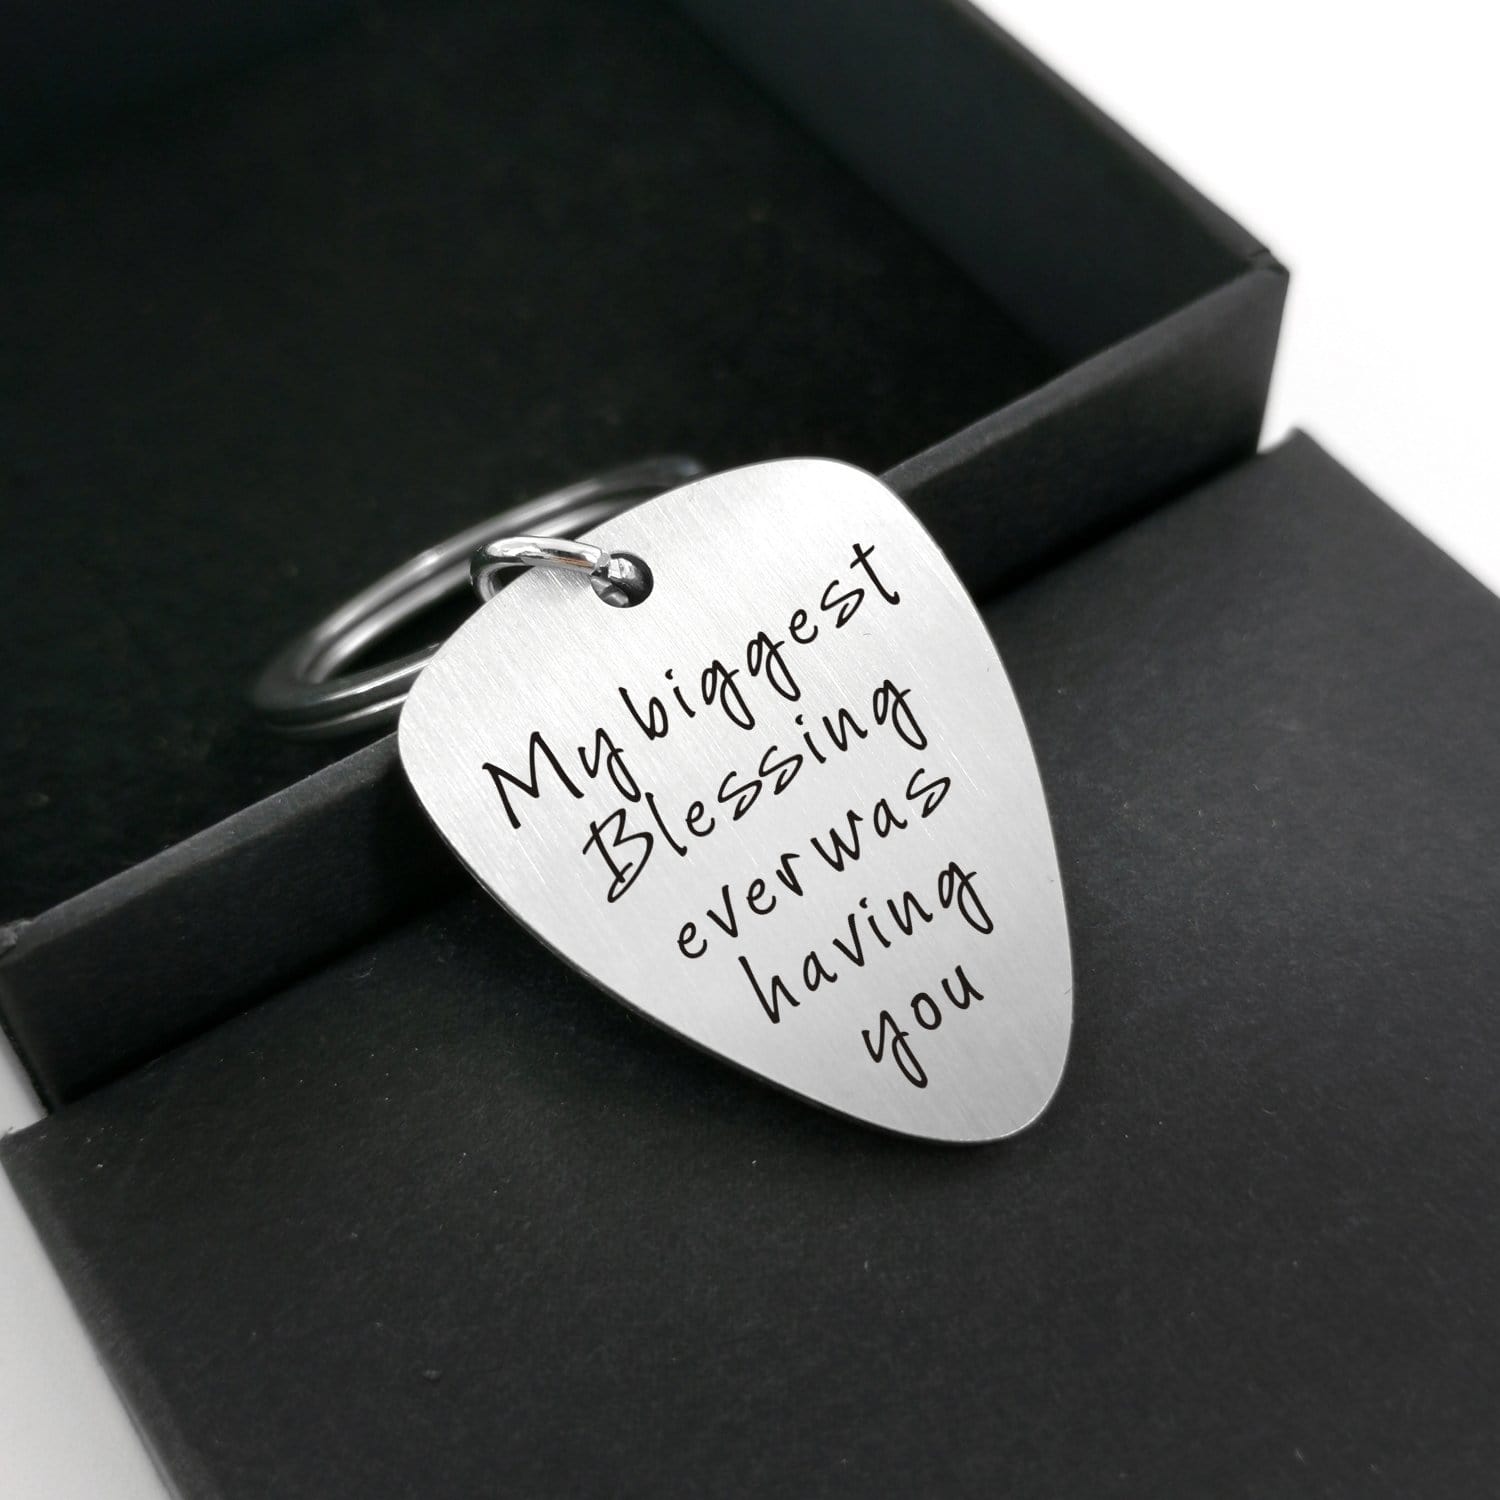 Guitar Pick Keychains My Biggest Blessing Ever - Customized Guitar Pick Keychain GiveMe-Gifts